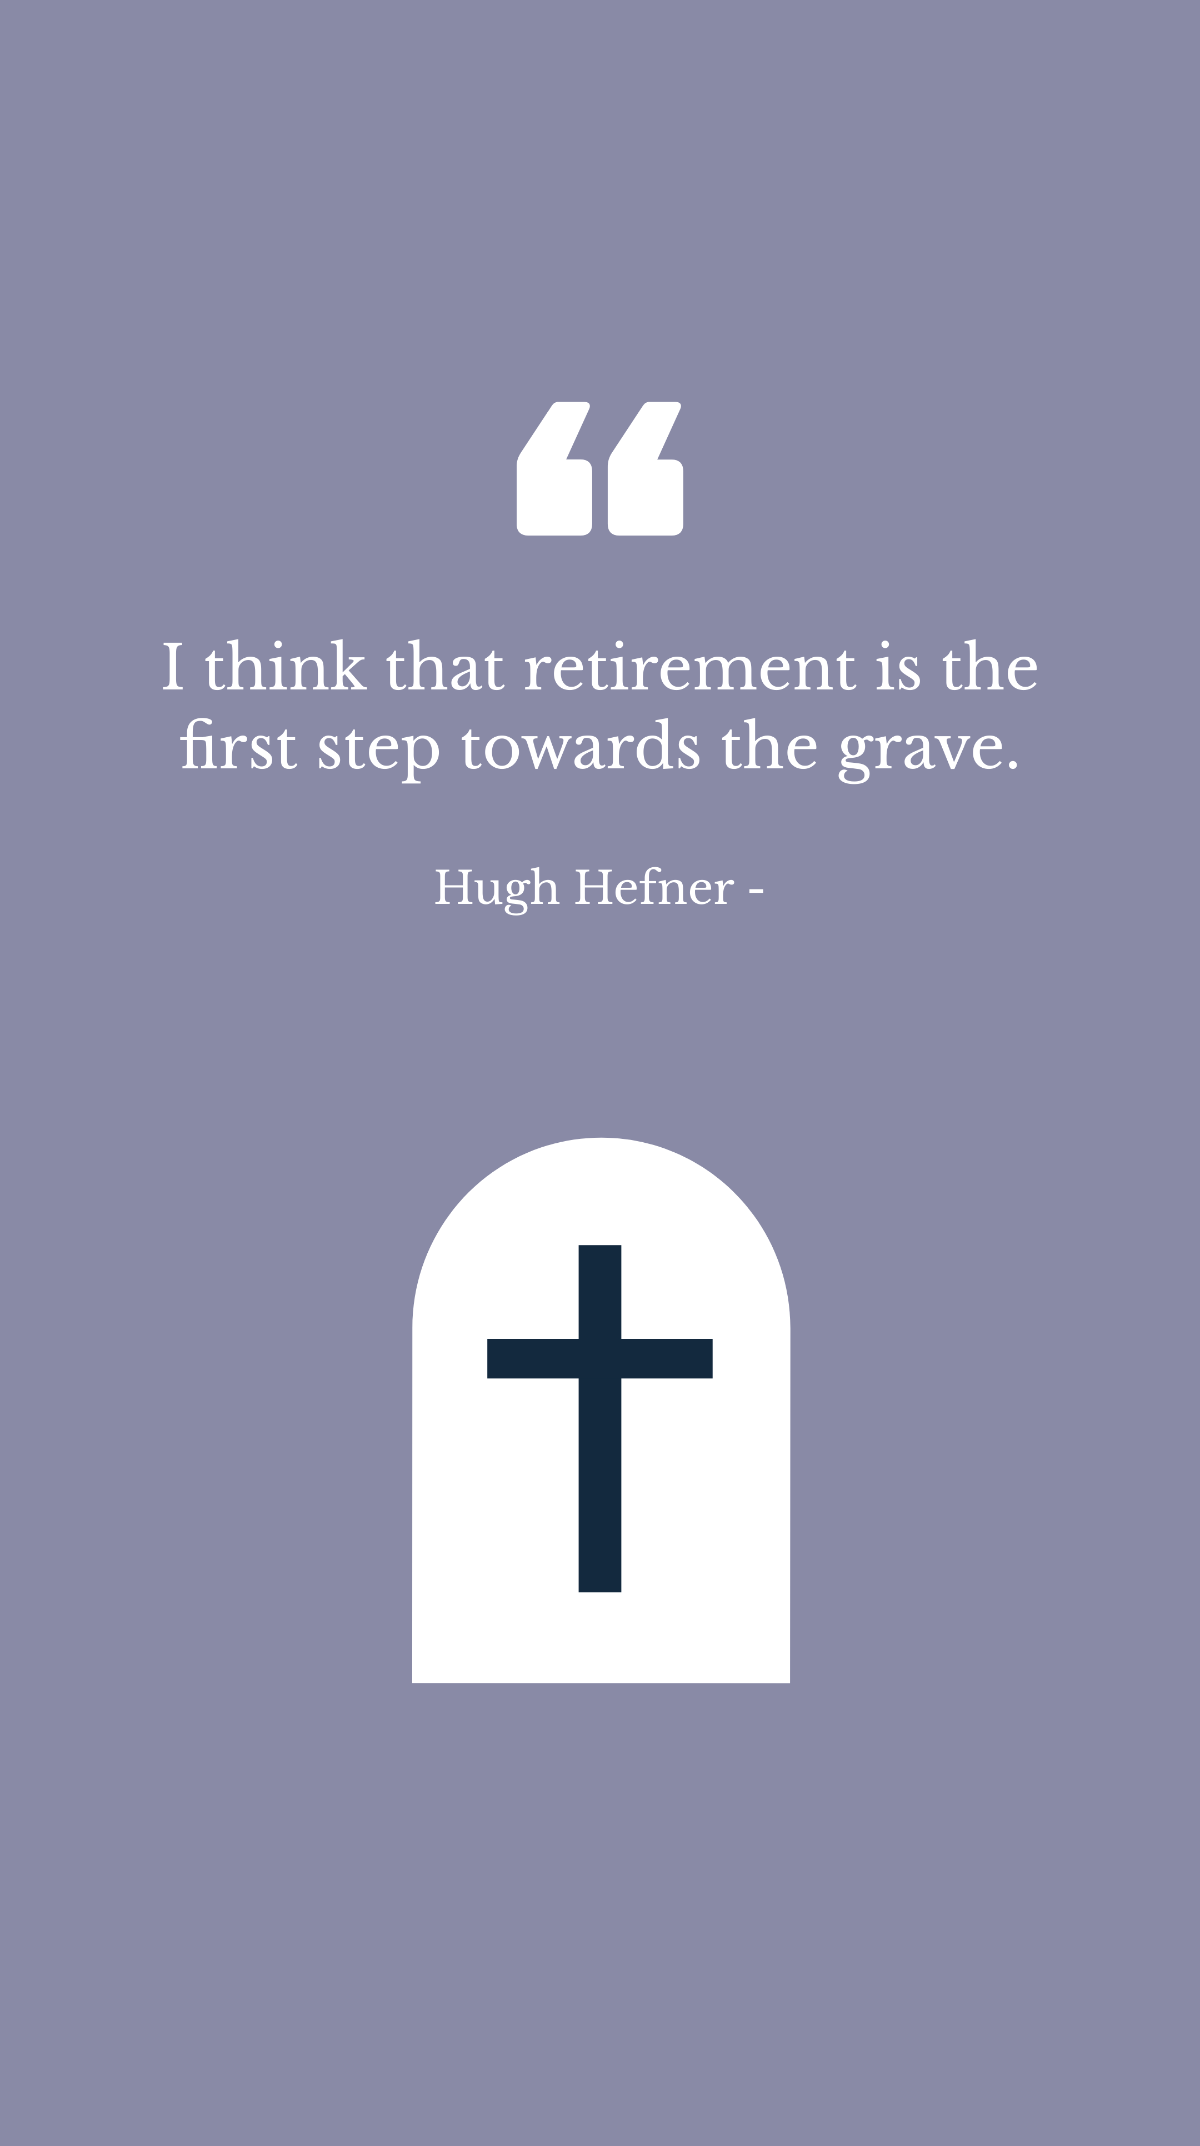 Hugh Hefner - I think that retirement is the first step towards the grave. Template